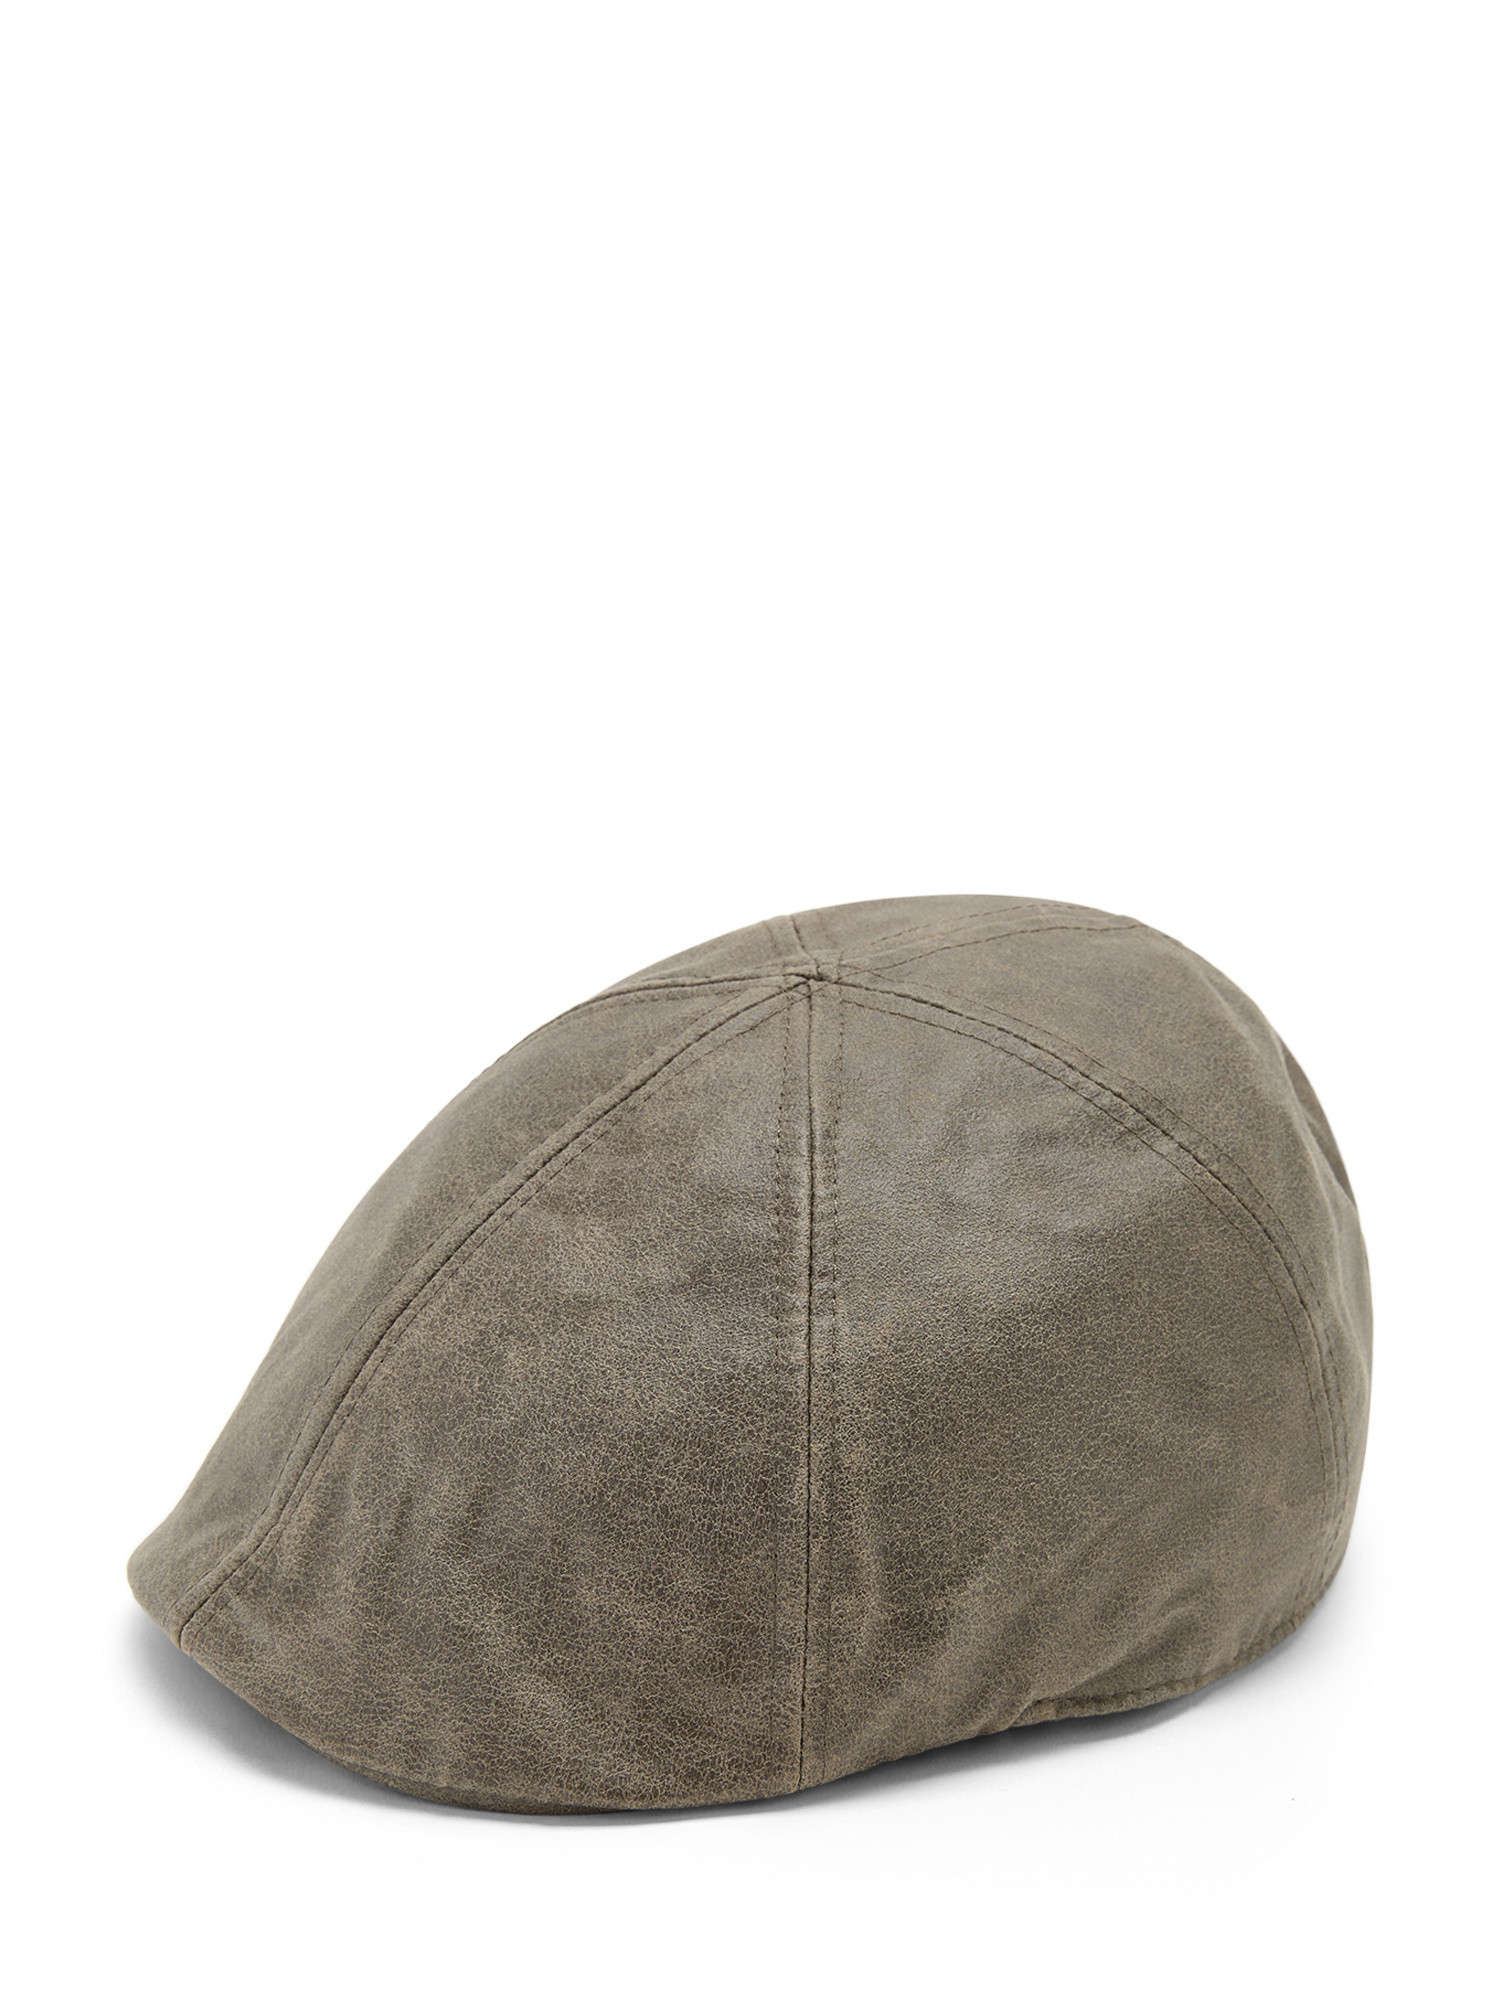 Luca D'Altieri - Synthetic cap, Olive Green, large image number 0